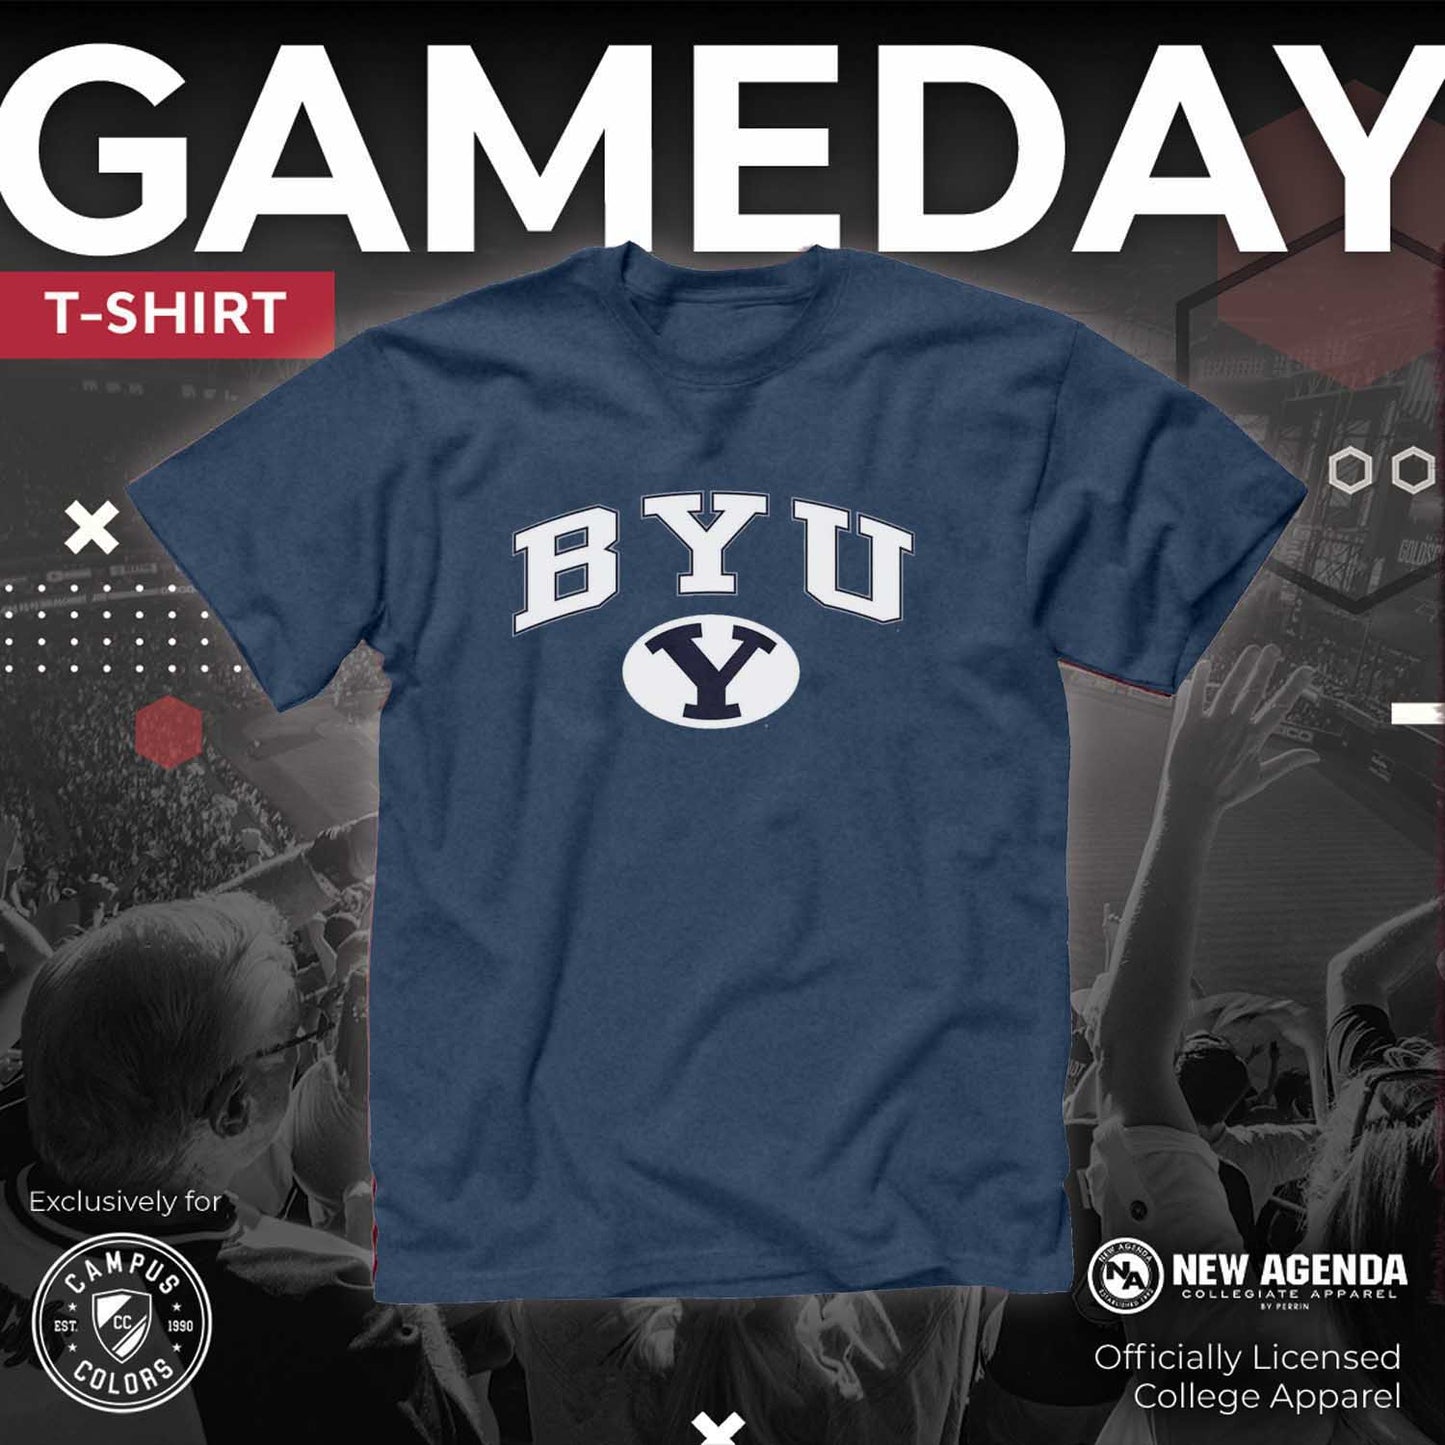 BYU Cougars NCAA Adult Gameday Cotton T-Shirt - Navy